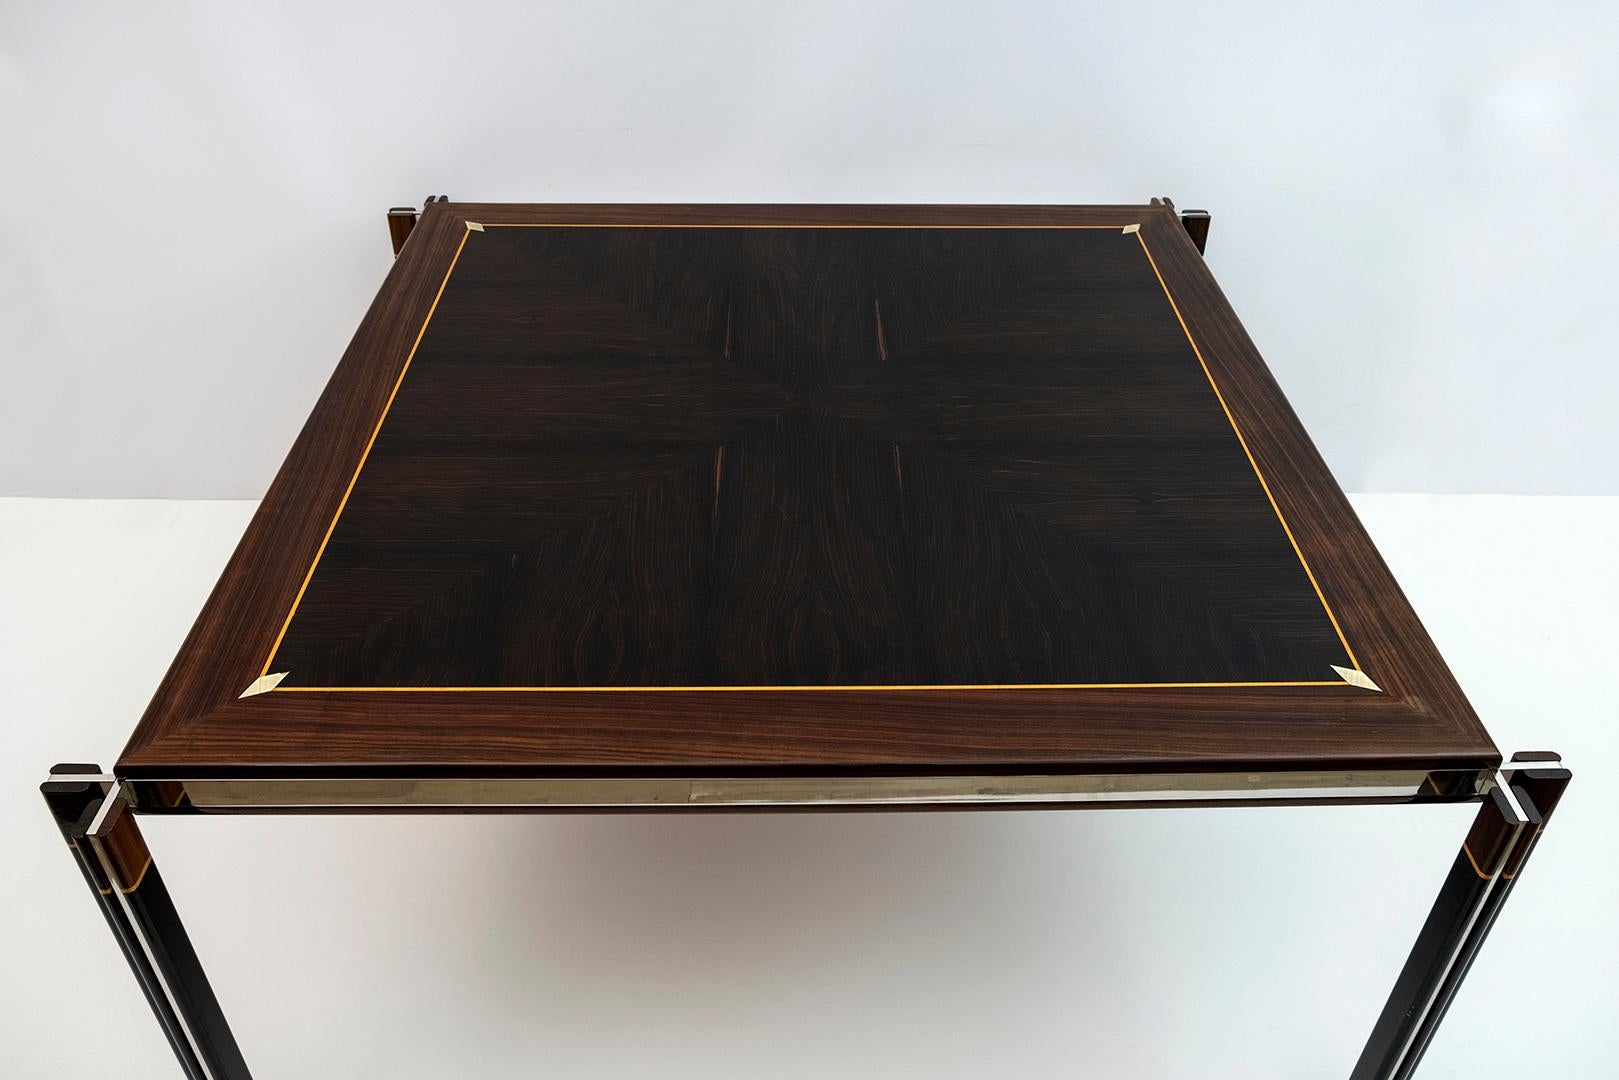 Paolo Barracchia Italian Steel and Inlaid Wood Dinning Table by Roman Deco, 1978 For Sale 1